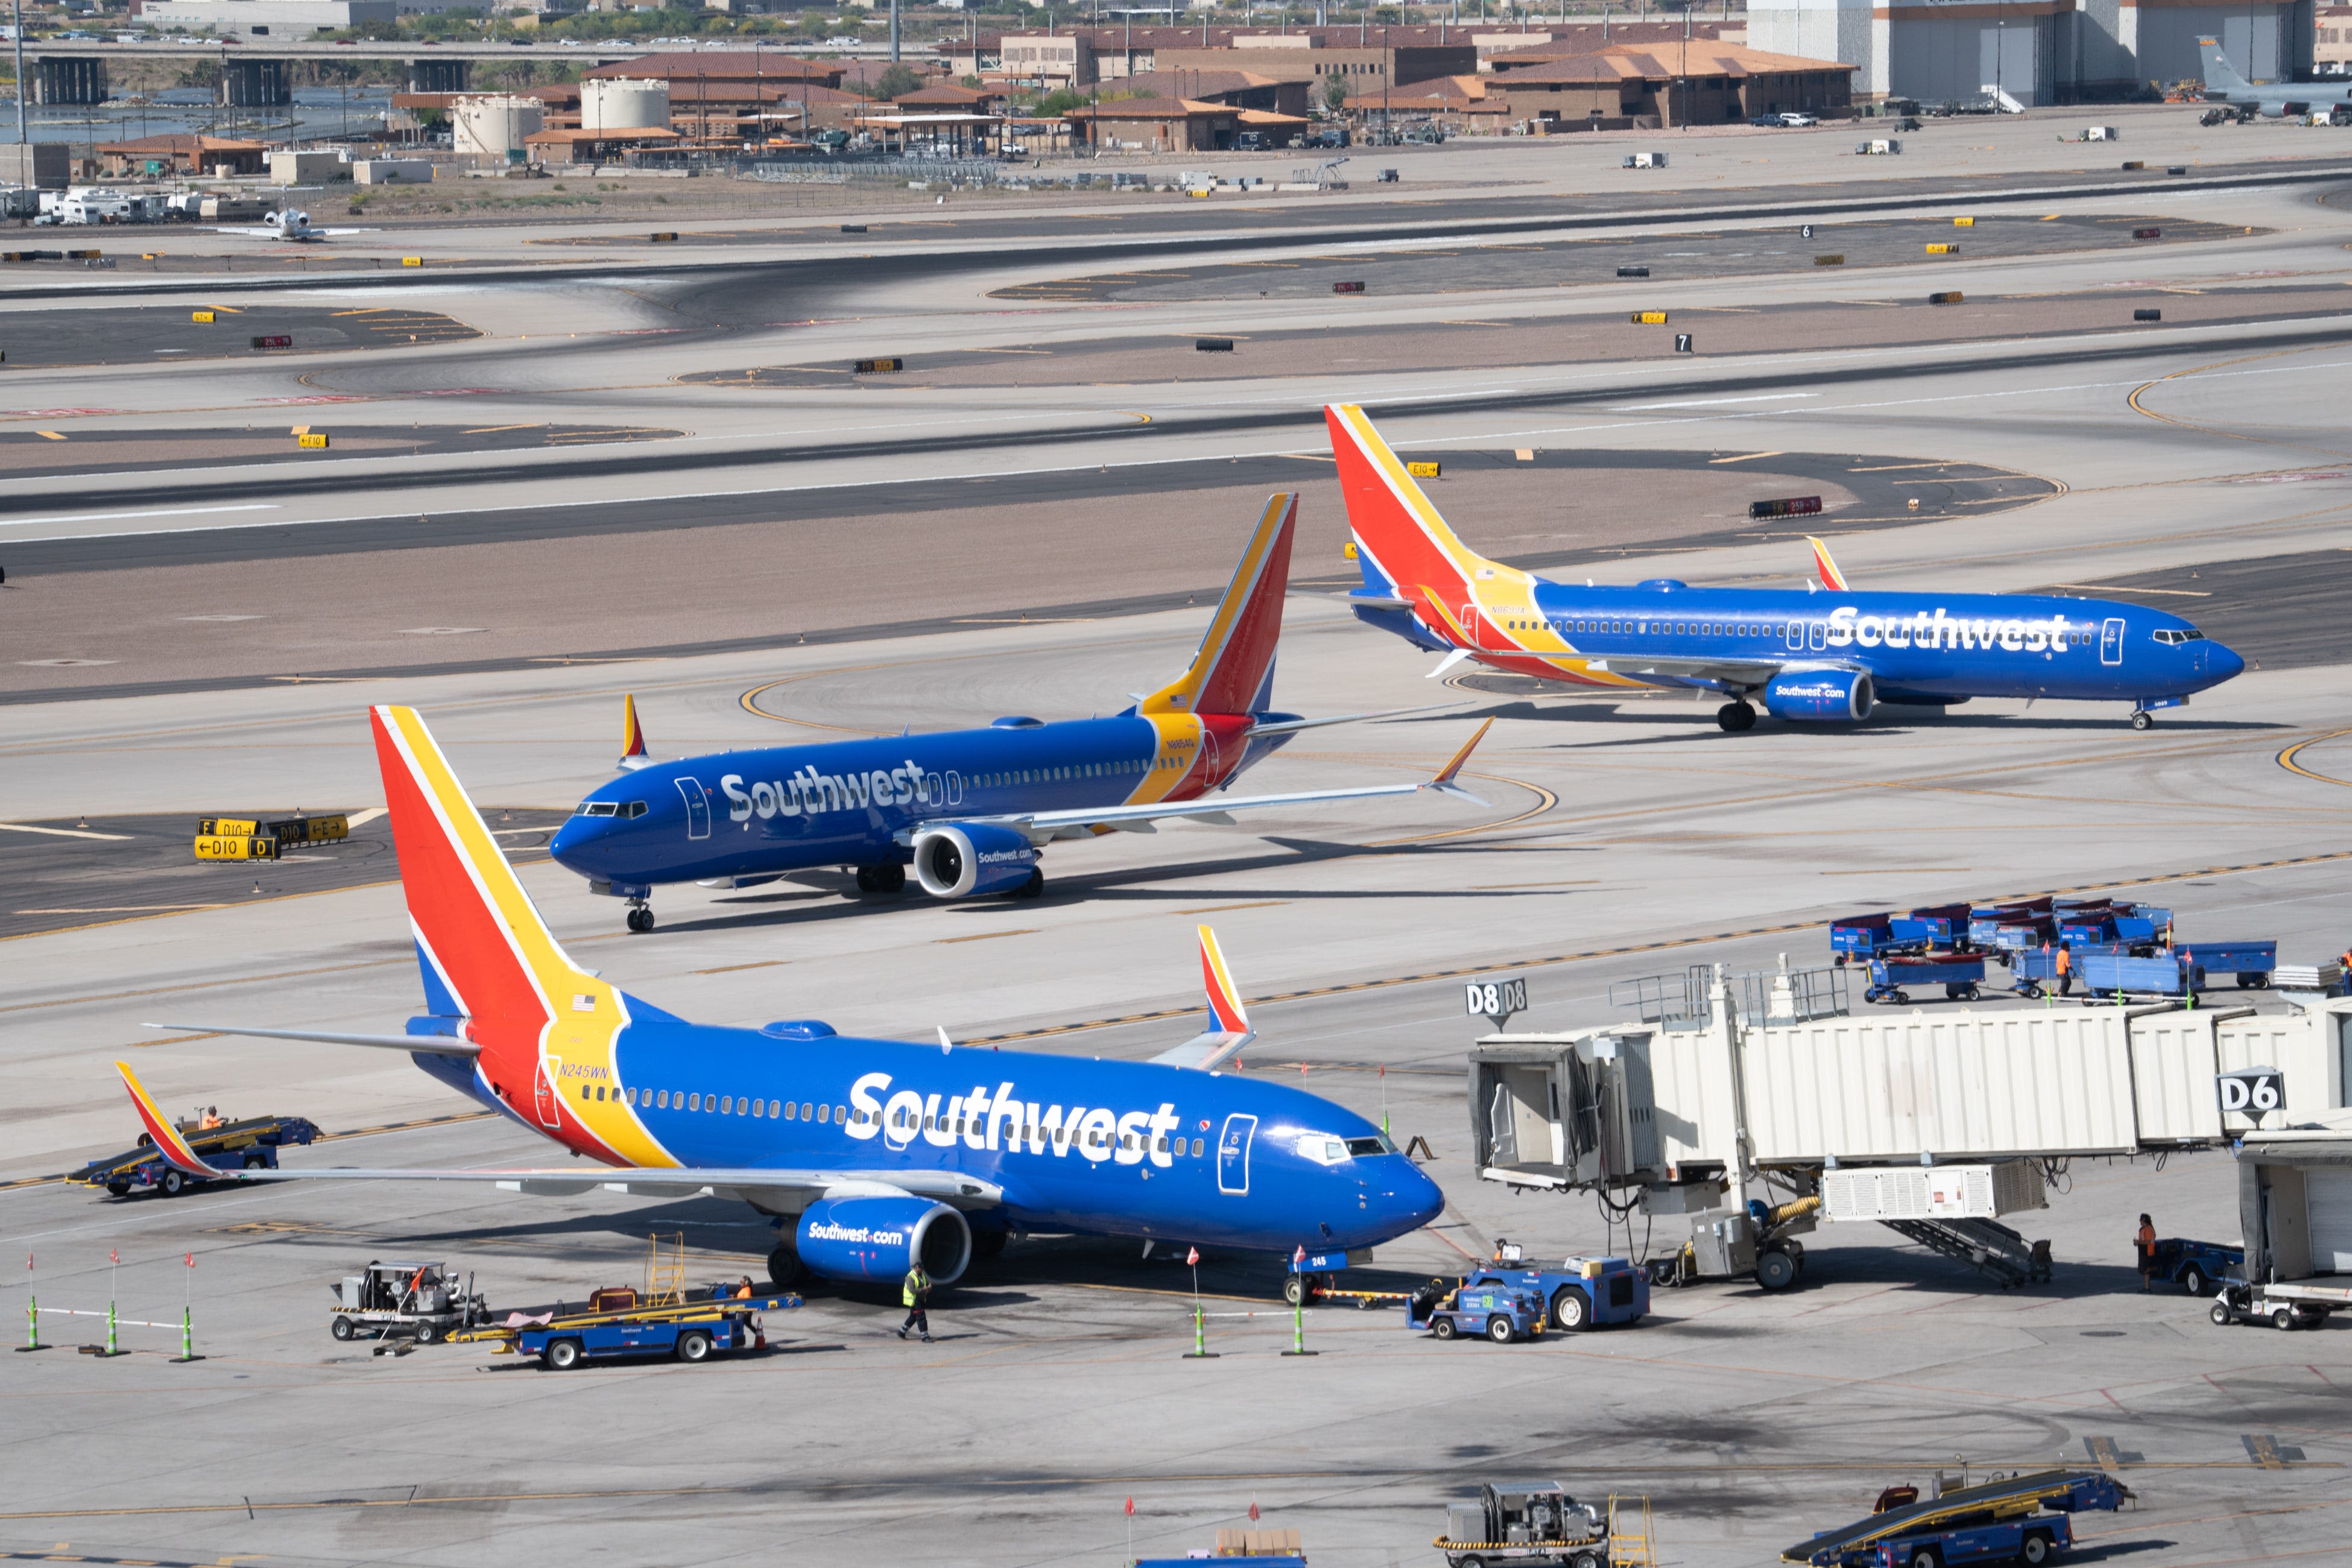 Over here, Southwest! Can Knoxville airport's new incentives woo more airlines?